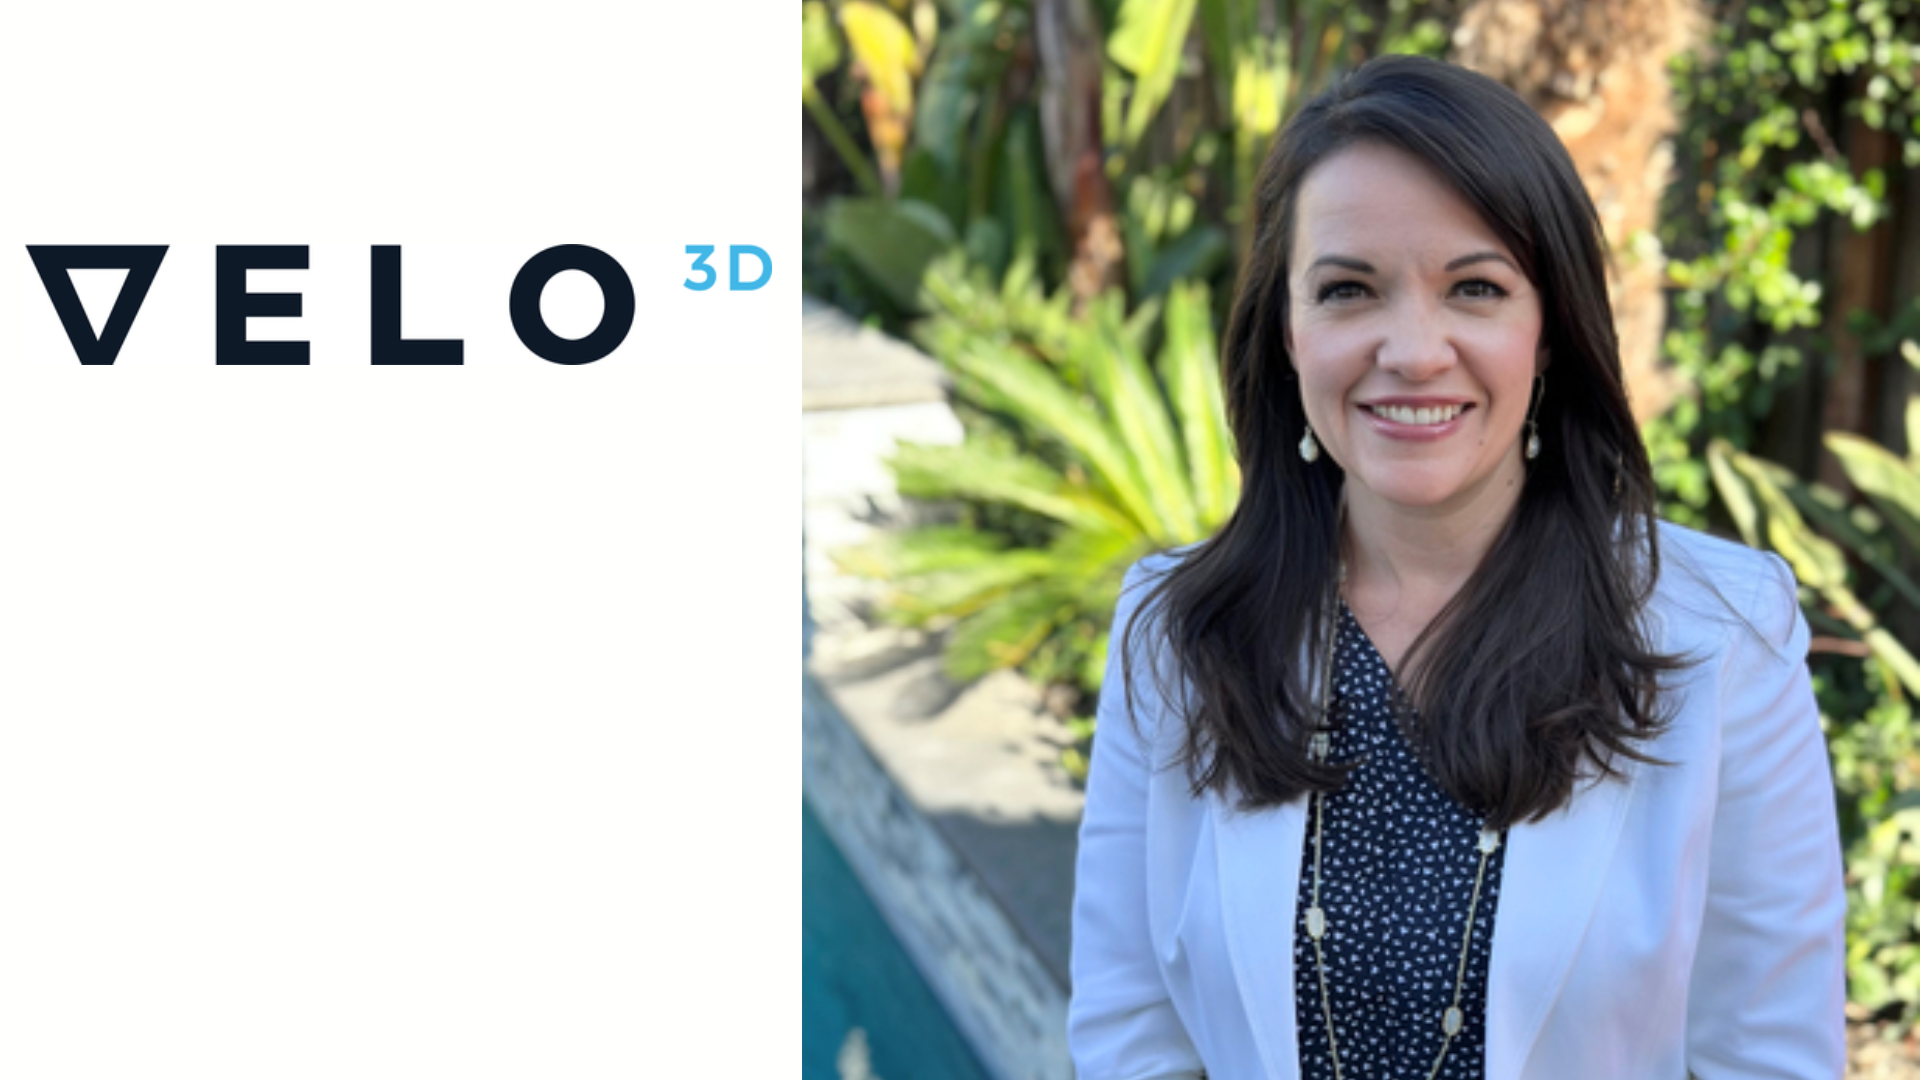 Velo3D, Inc. announced it has appointed Jessie Lockhart as Chief People Officer, bringing more than 20 years of experience in human resources